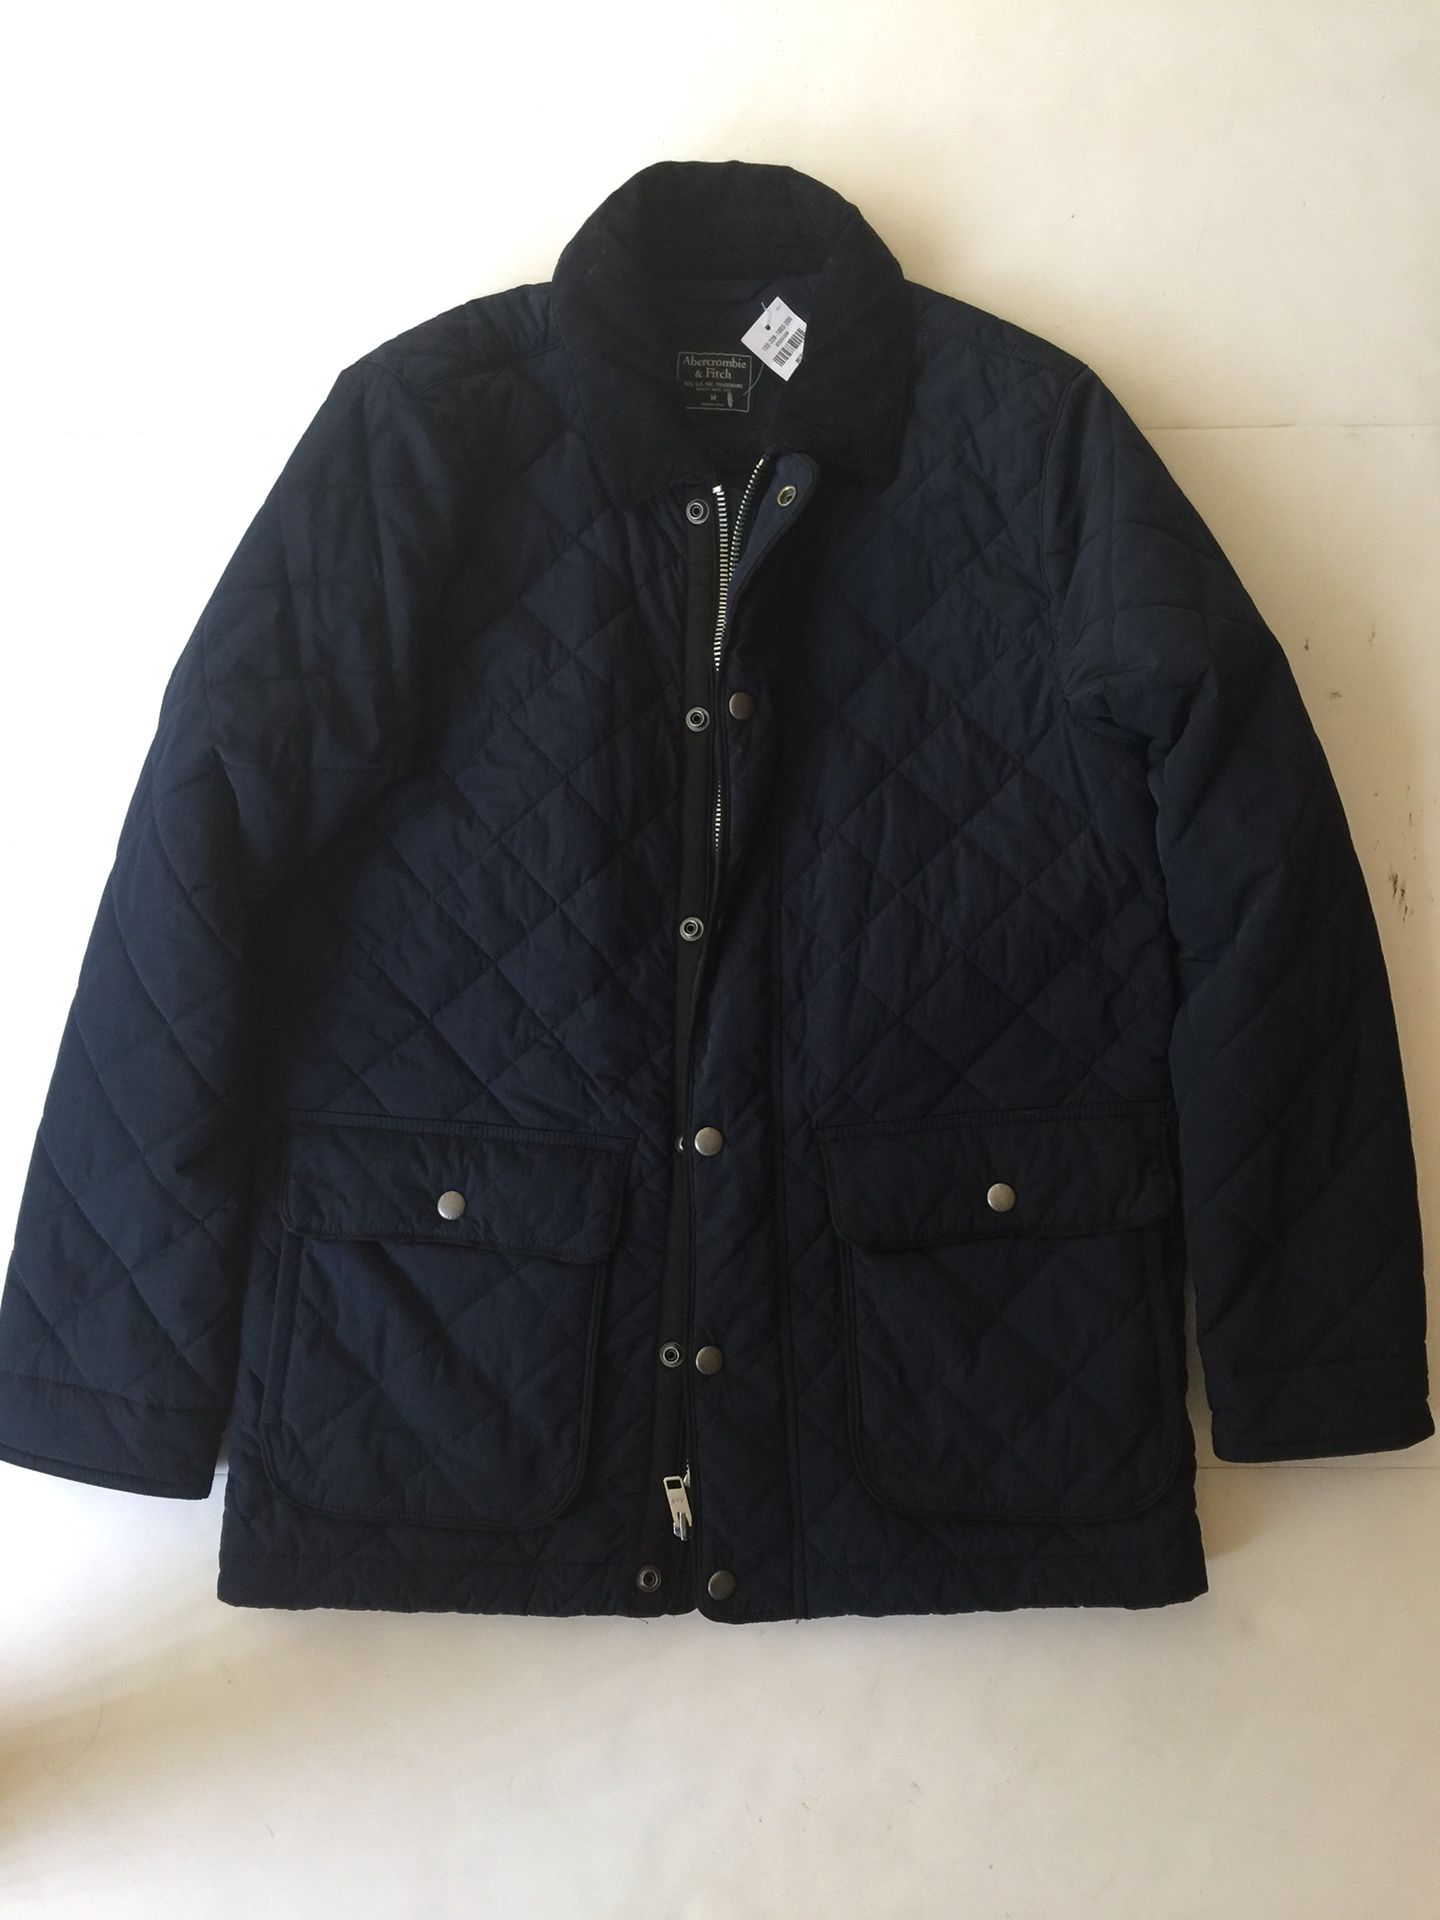 Abercrombie & fitch Men Diamond Quilted Jacket for Sale in Franklin ...